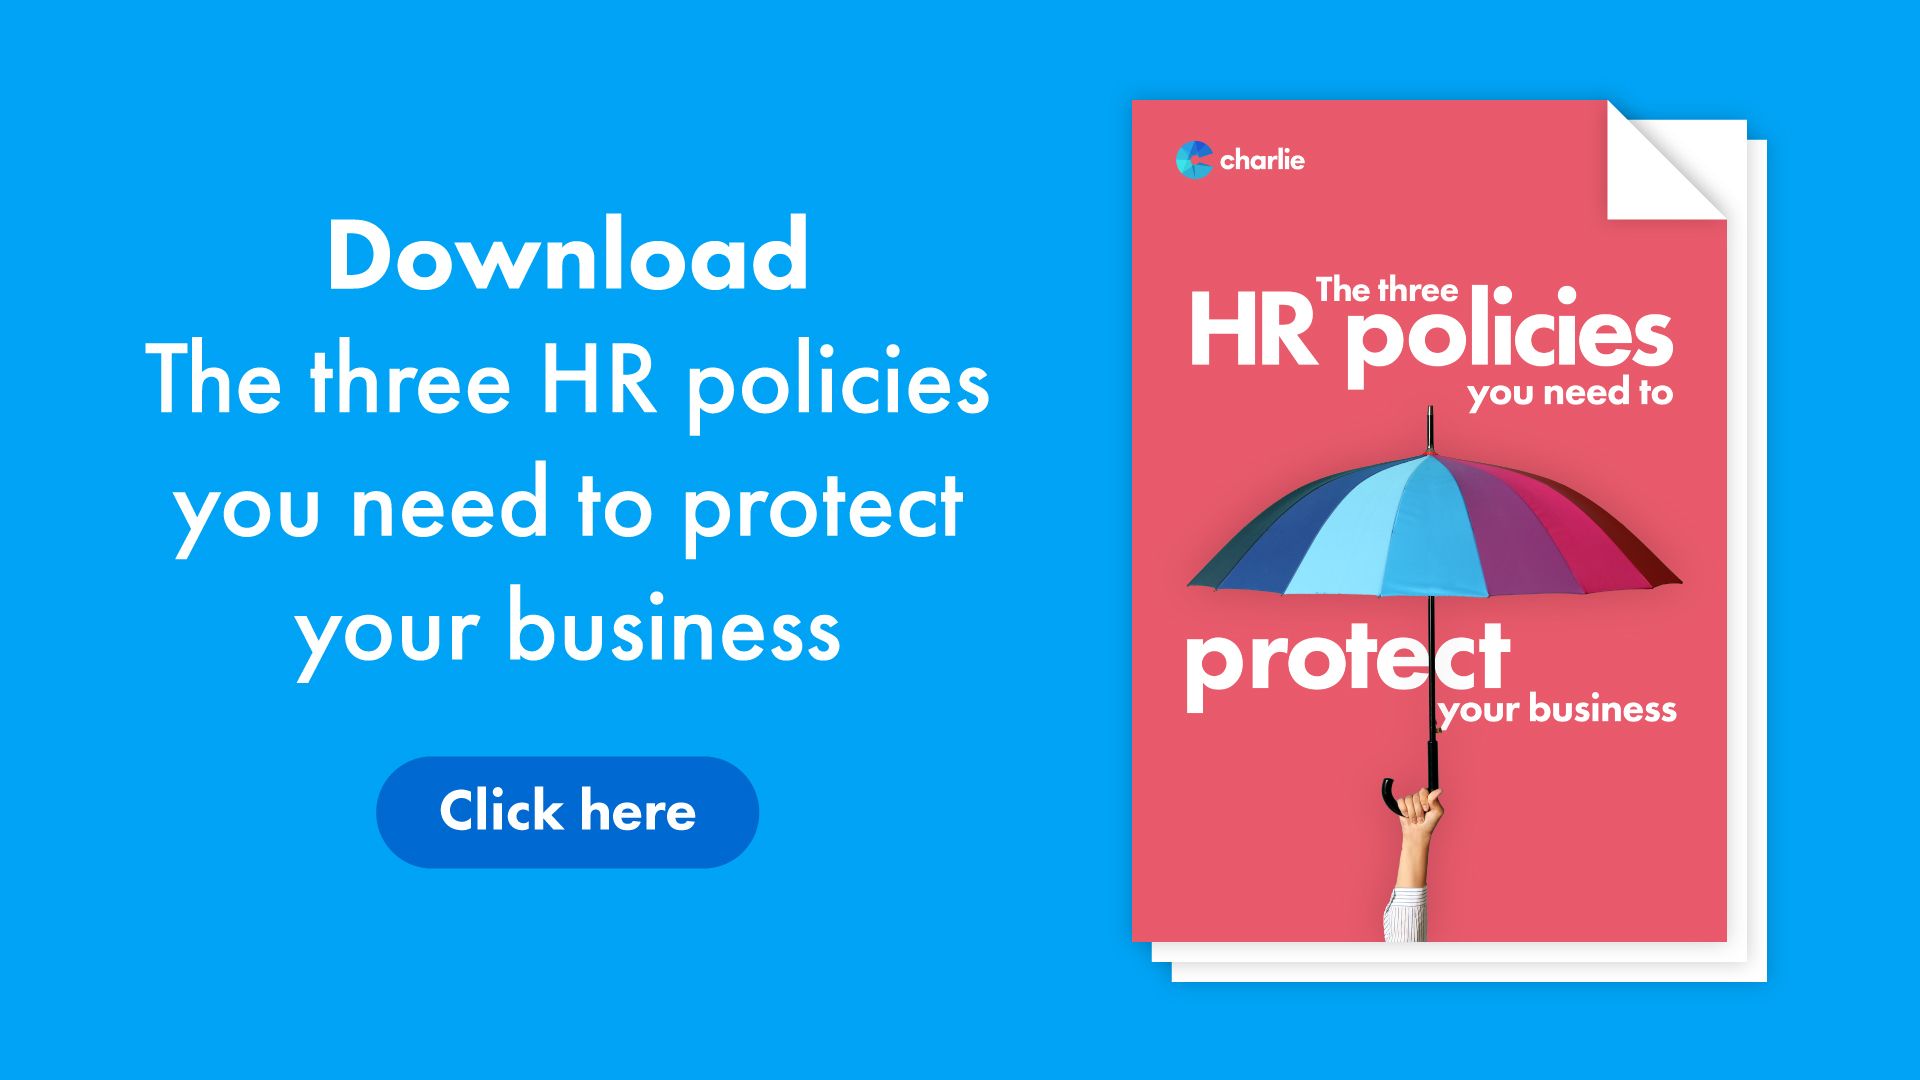 Click here to download the three HR policies for your business